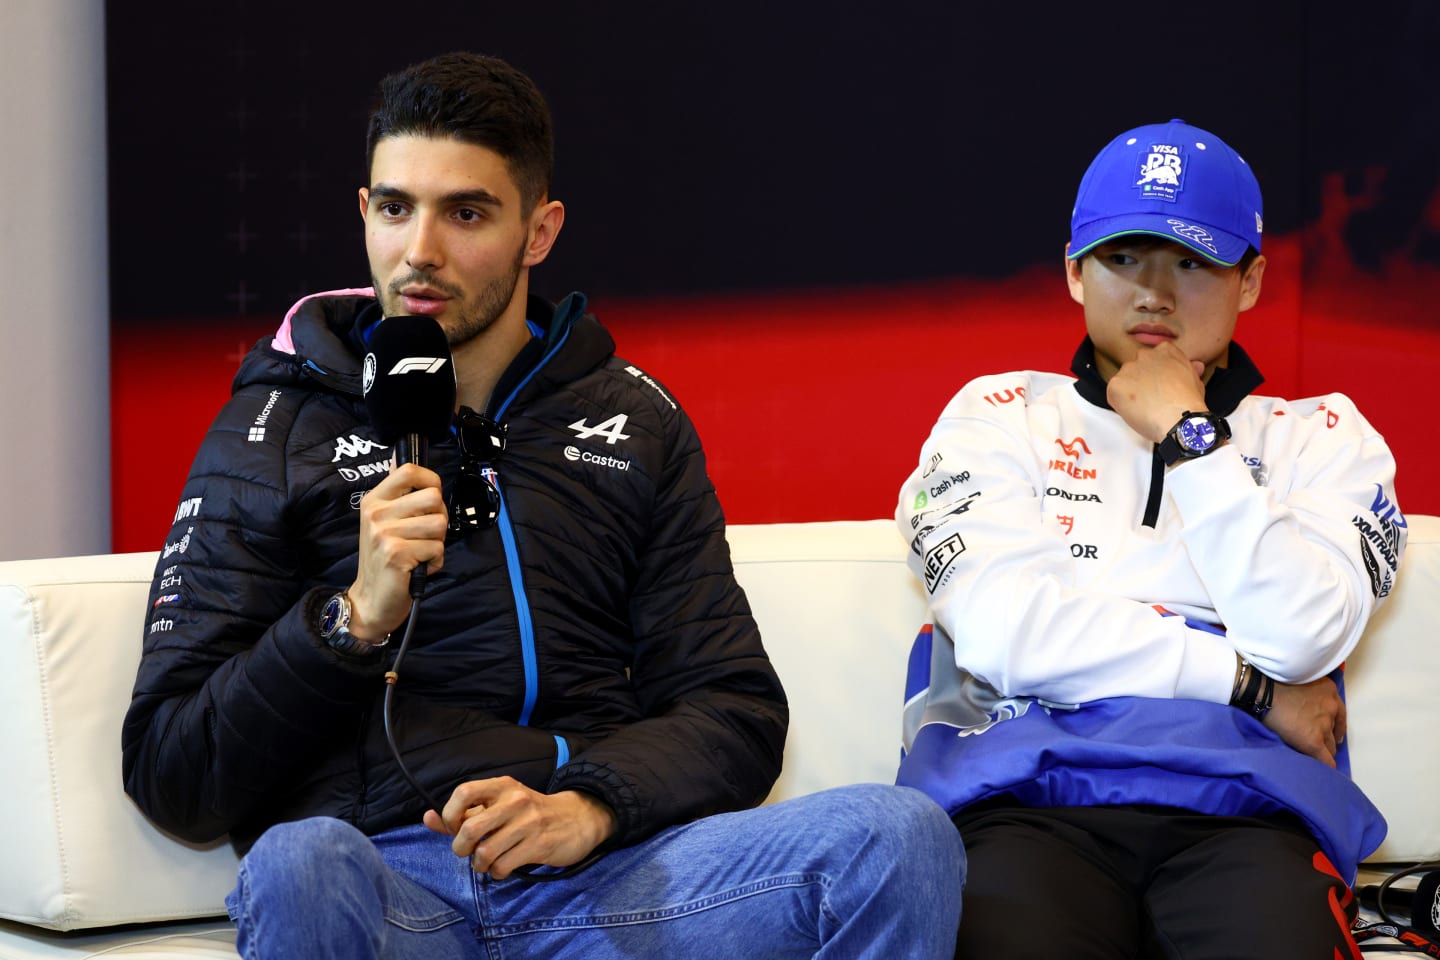 MONTE-CARLO, MONACO - MAY 23: Esteban Ocon of France and Alpine F1 and Yuki Tsunoda of Japan and Visa Cash App RB attend the Drivers Press Conference during previews ahead of the F1 Grand Prix of Monaco at Circuit de Monaco on May 23, 2024 in Monte-Carlo, Monaco. (Photo by Clive Rose/Getty Images)